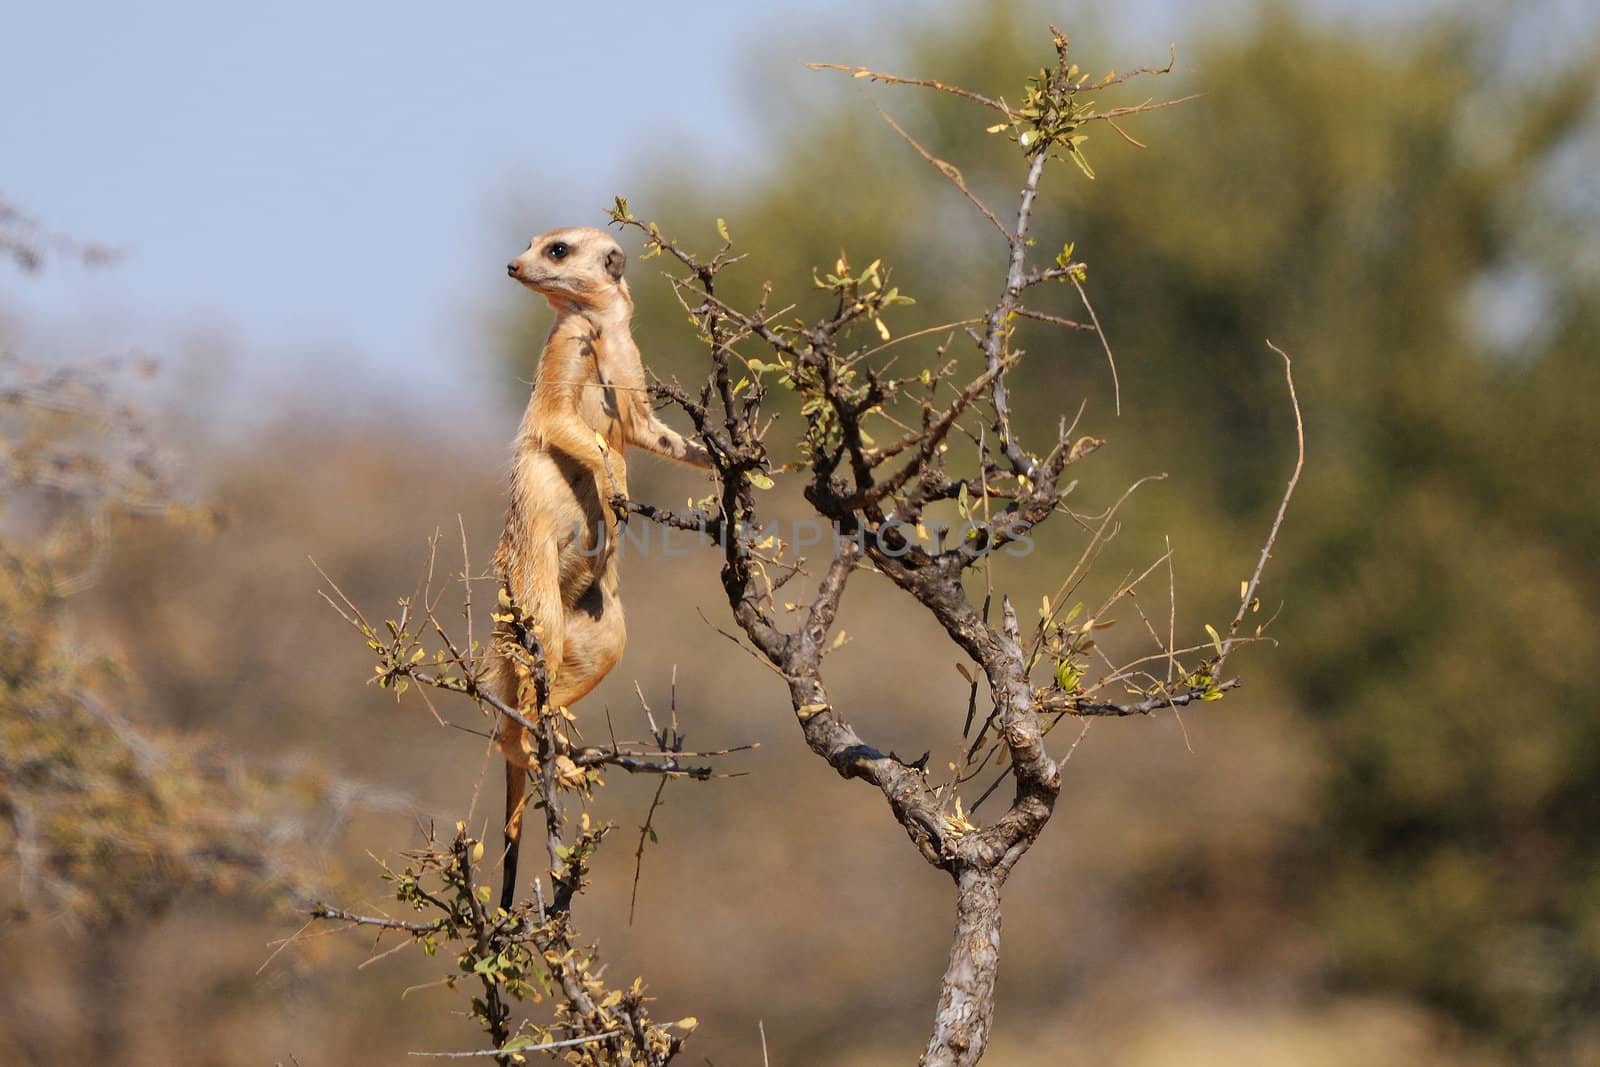 The meerkat or suricate, Suricata suricatta, is a small mammal belonging to the mongoose family. This photo was taken in the Mokala National Park, Northern Cape, South Africa